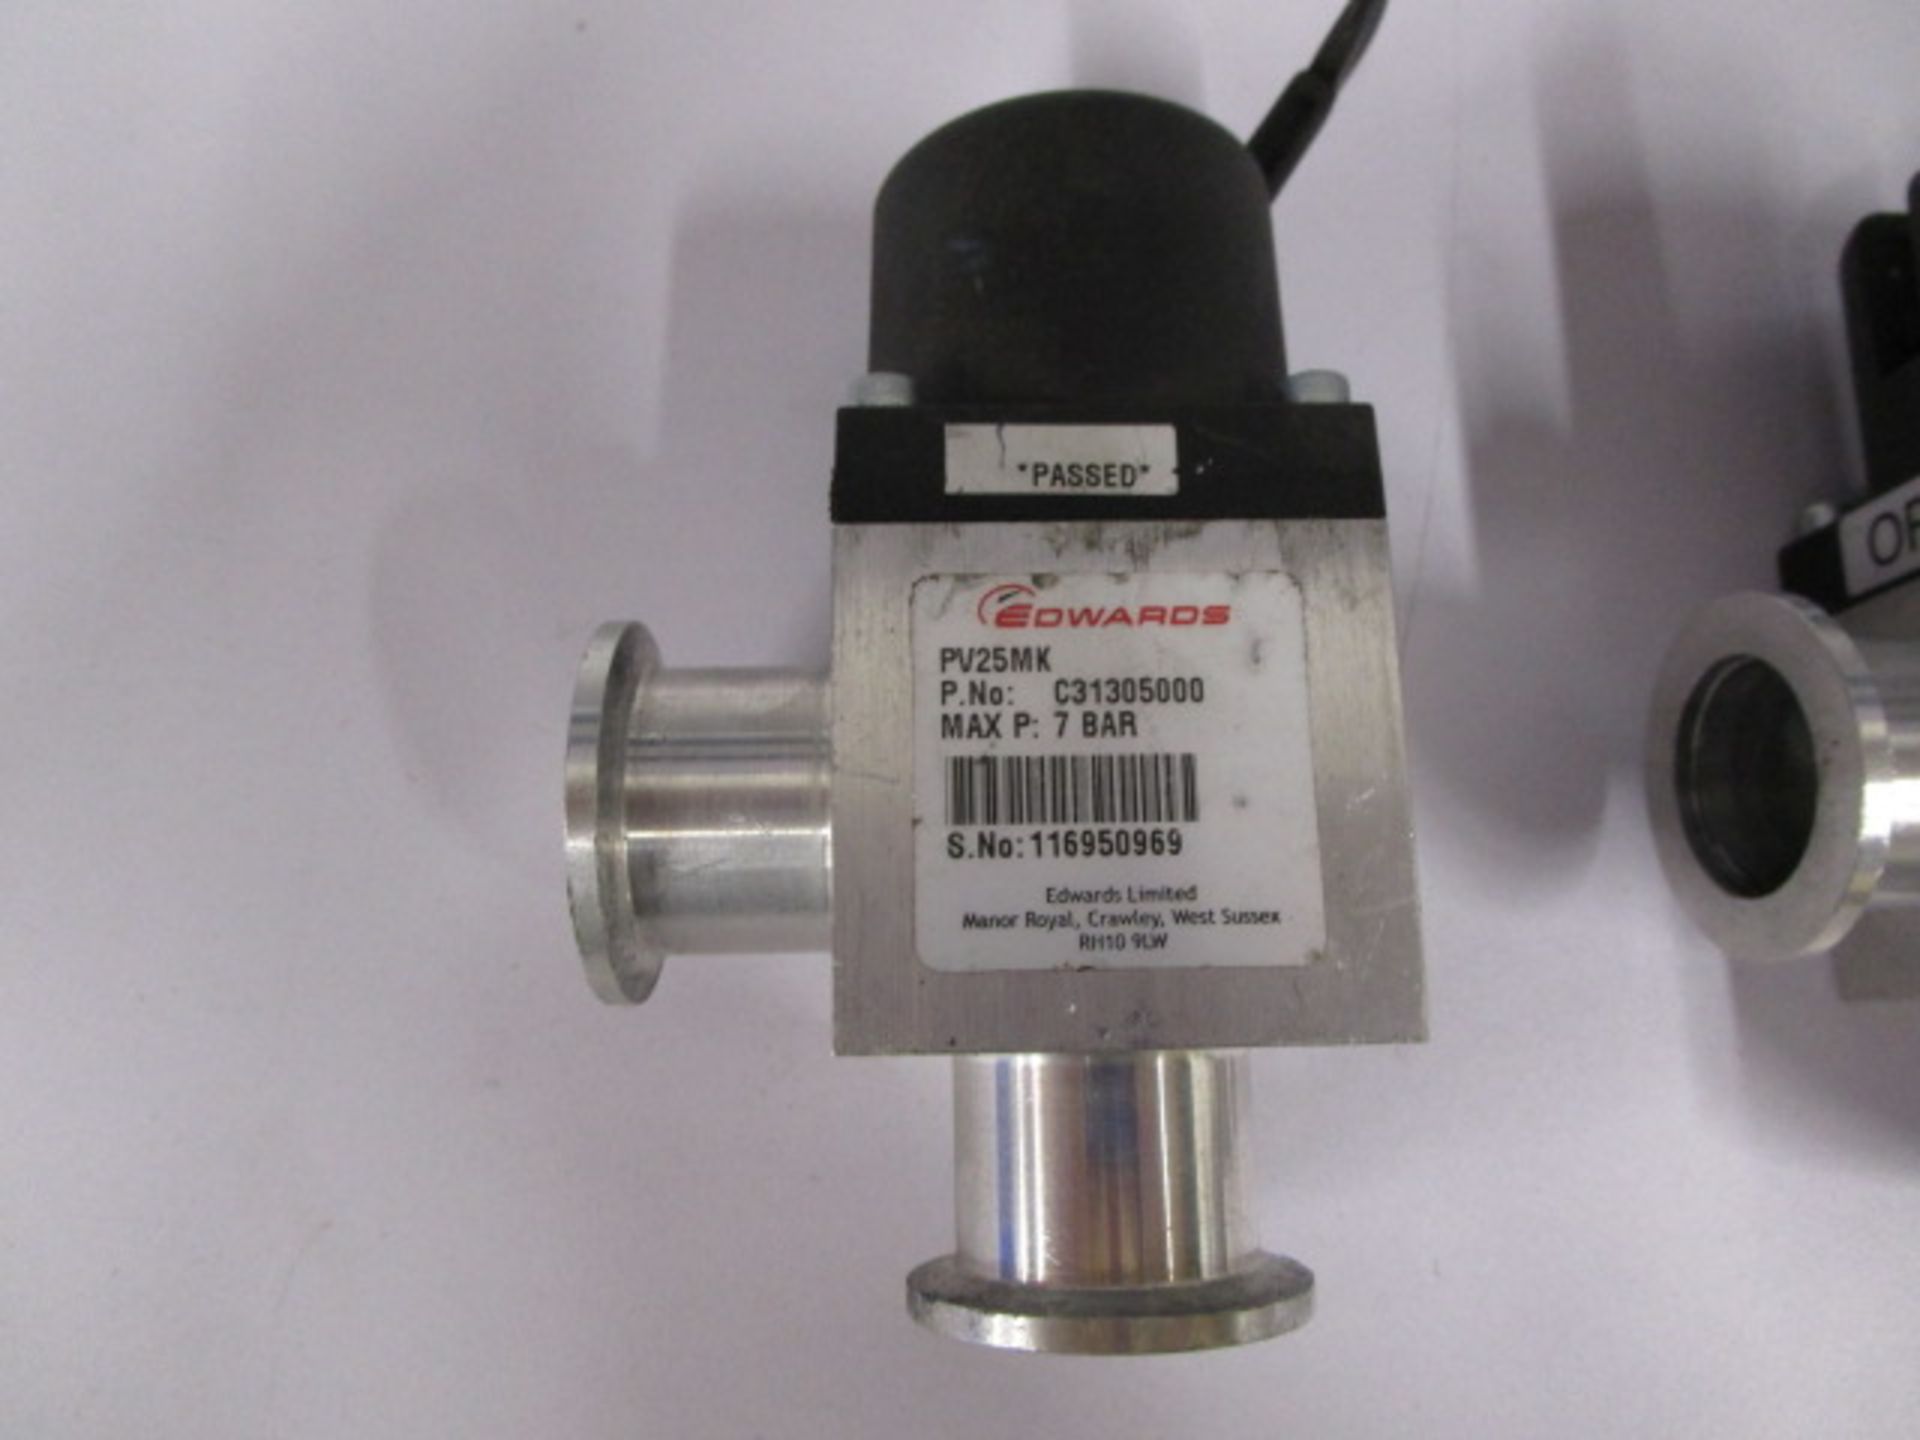 QUANTITY OF 2 EDWARDS PV25MK RIGHT ANGLE PIPELINE ISOLATION VALVE - Image 2 of 5